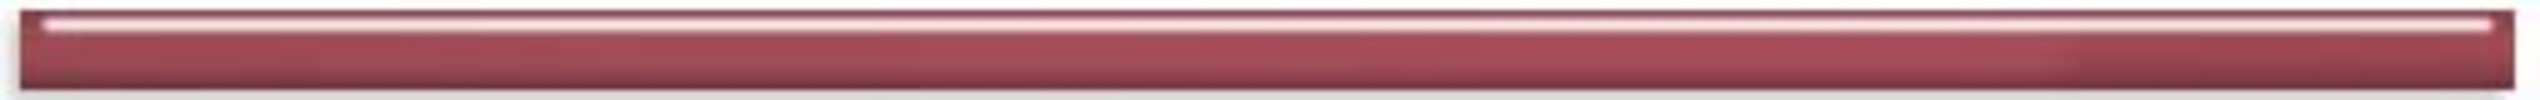 Grace Berry 7/16×11-13/16 Rounded Edge Glossy